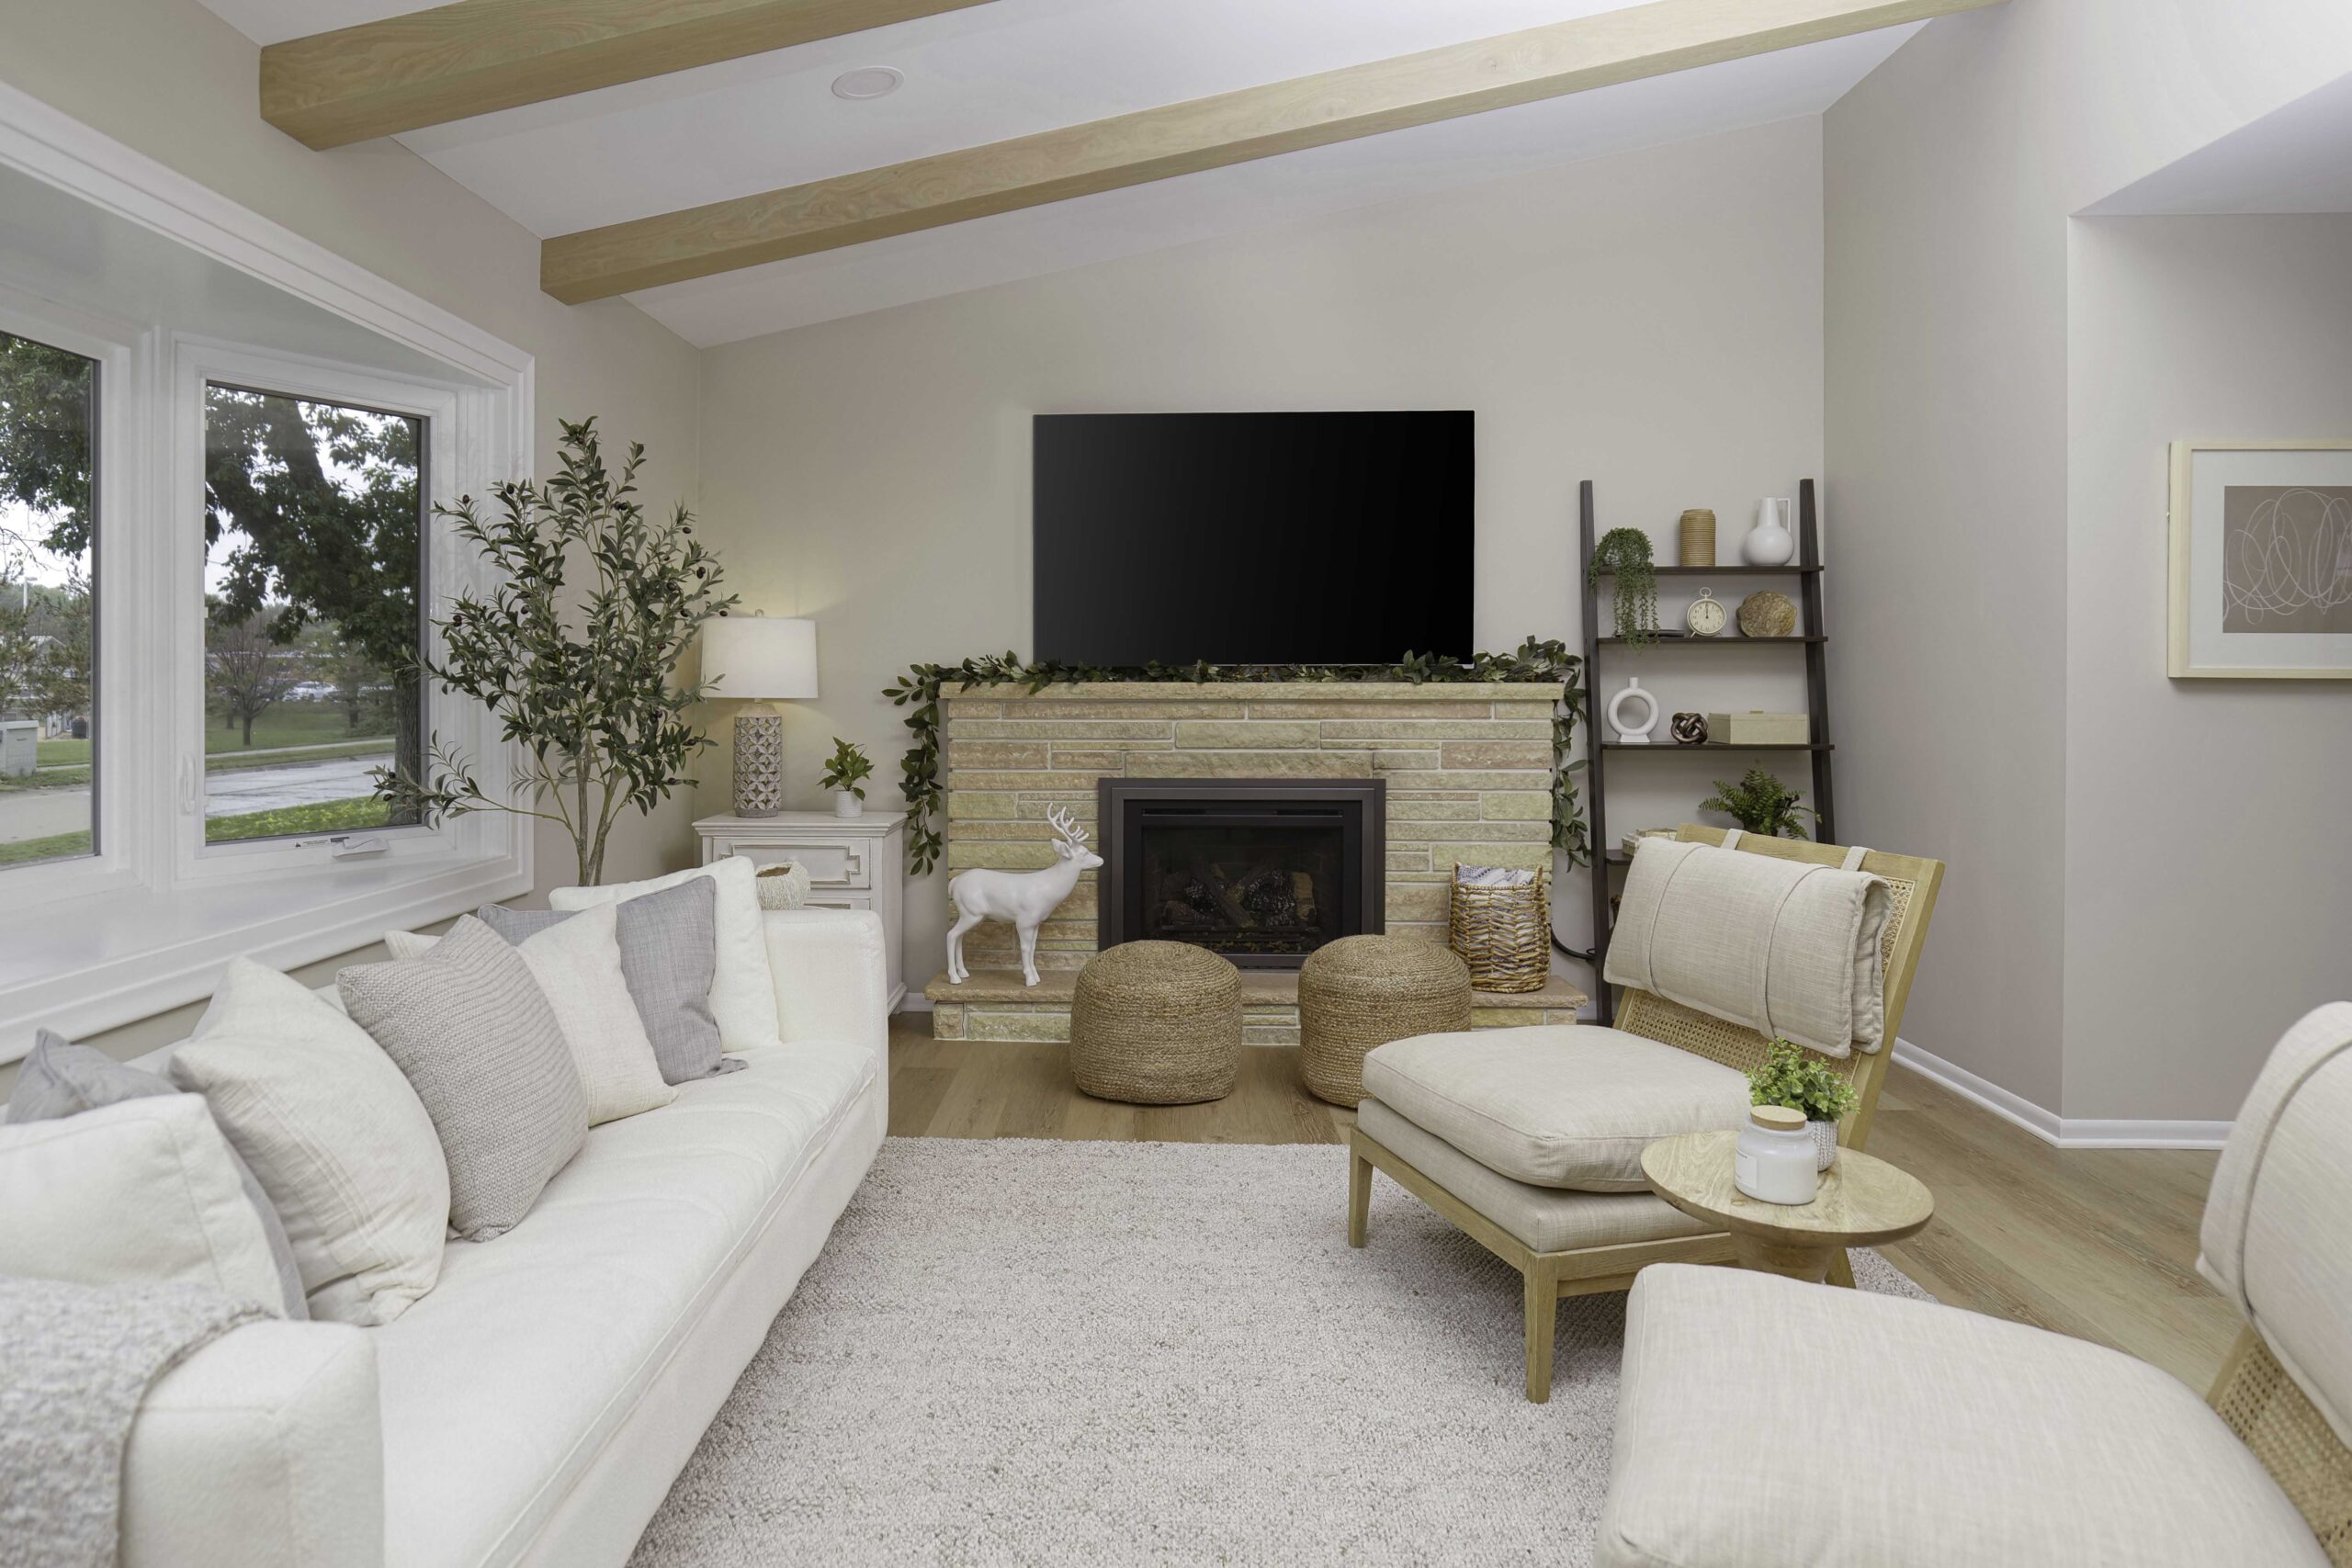 A coastal style living room with white furniture and a fireplace.